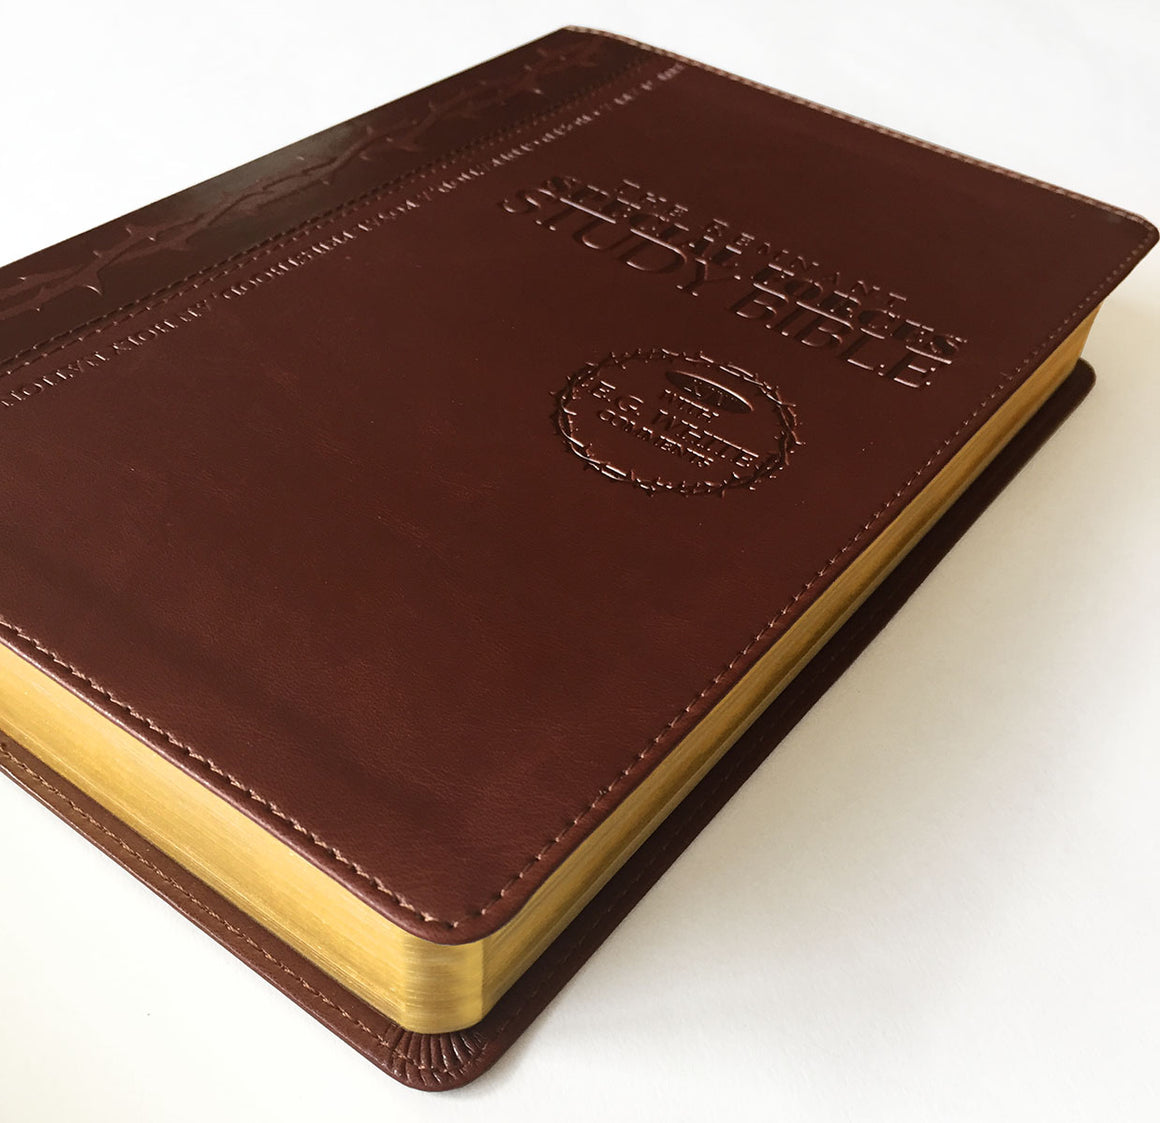 Remnant Study Bible, KJV - Special Forces, Leather-soft Brown